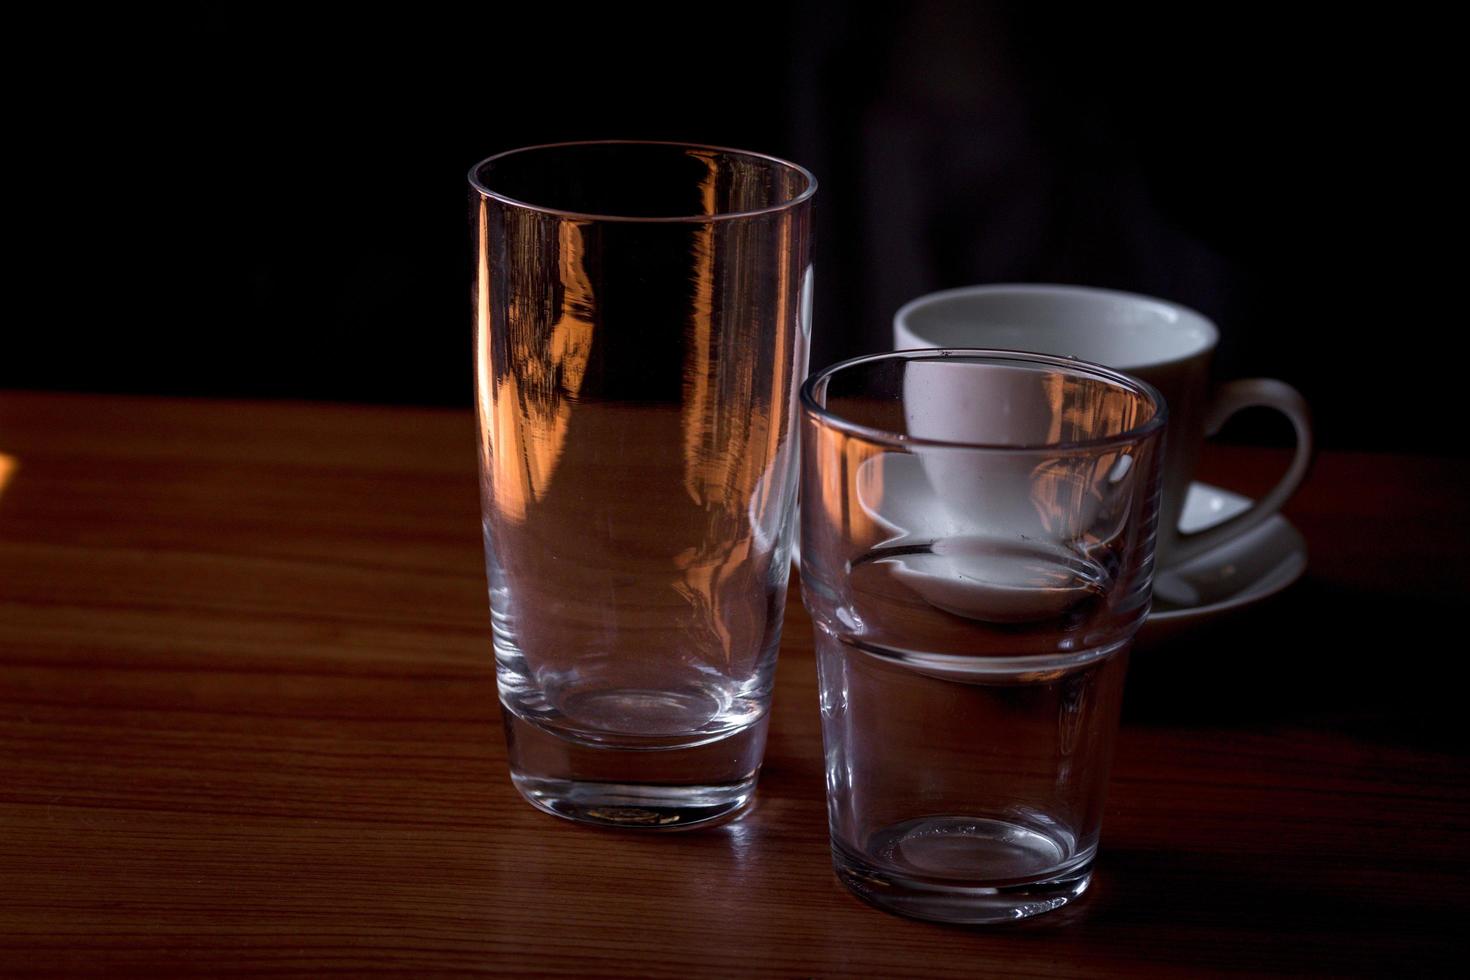 Transparent glass water glasses and coffee mugs placed on a wooden table. photo